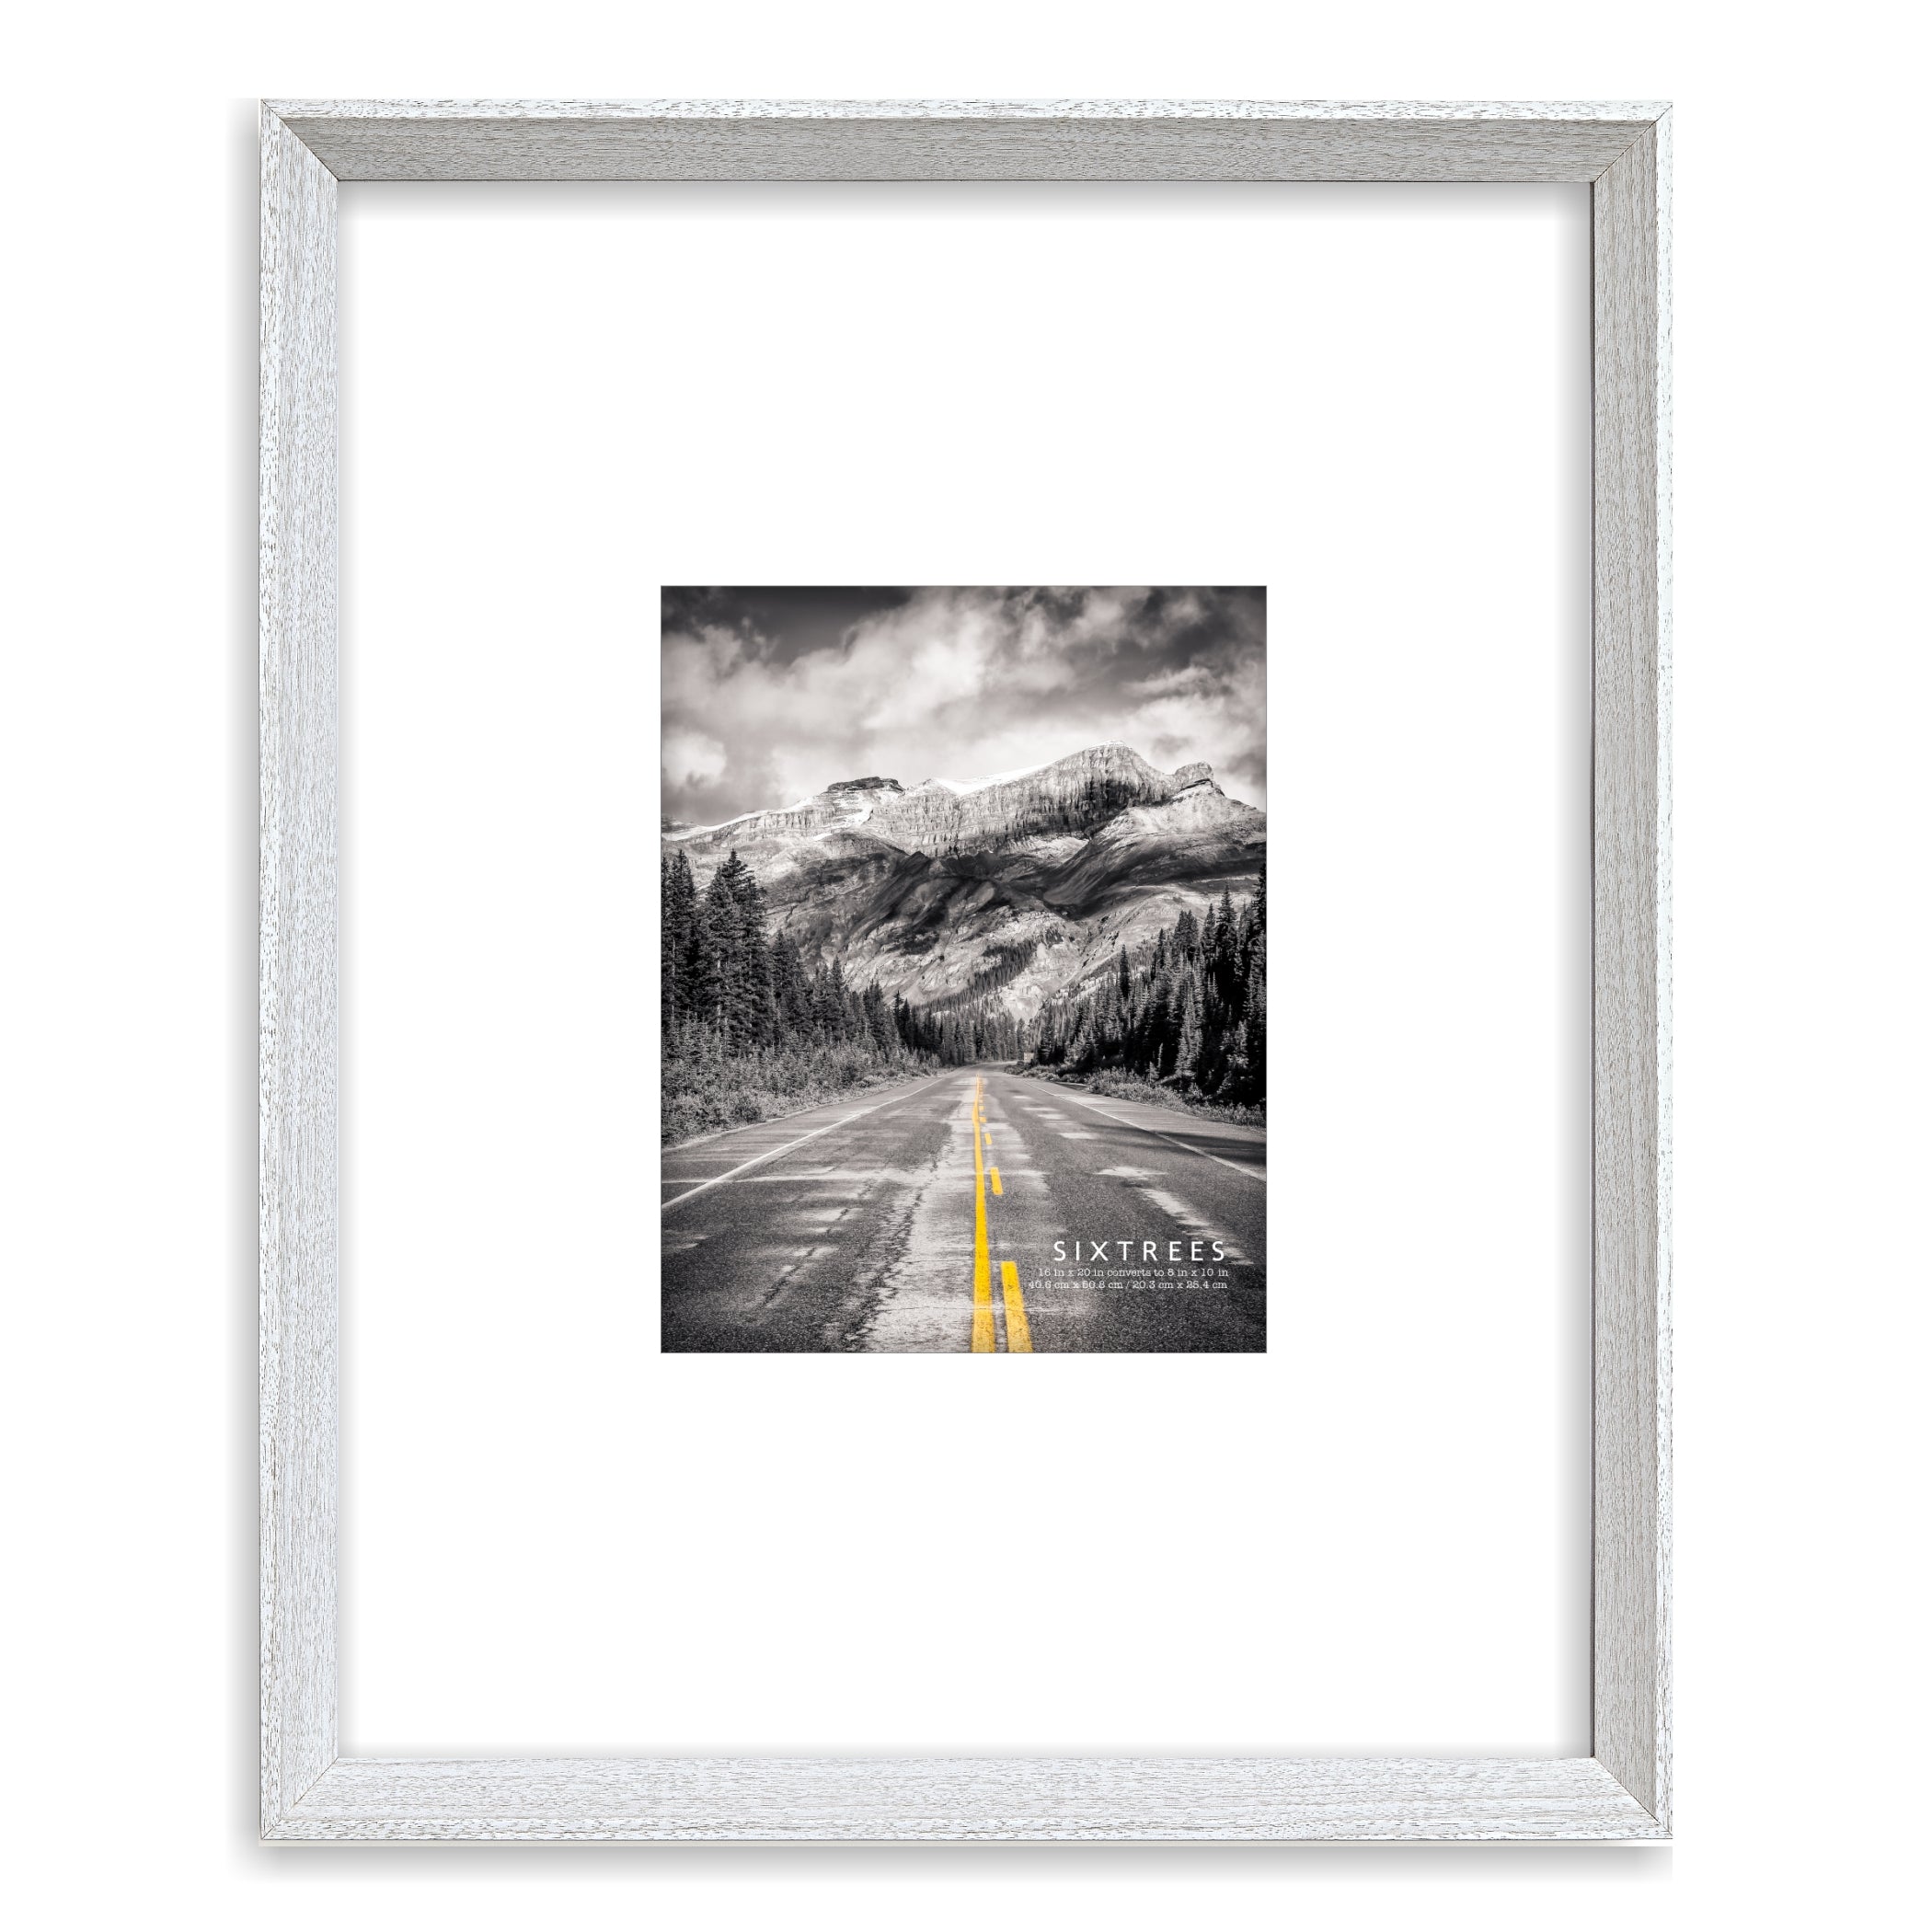 Stark Matted Collection Deep Wood Picture Frames -11X14 or 16X20